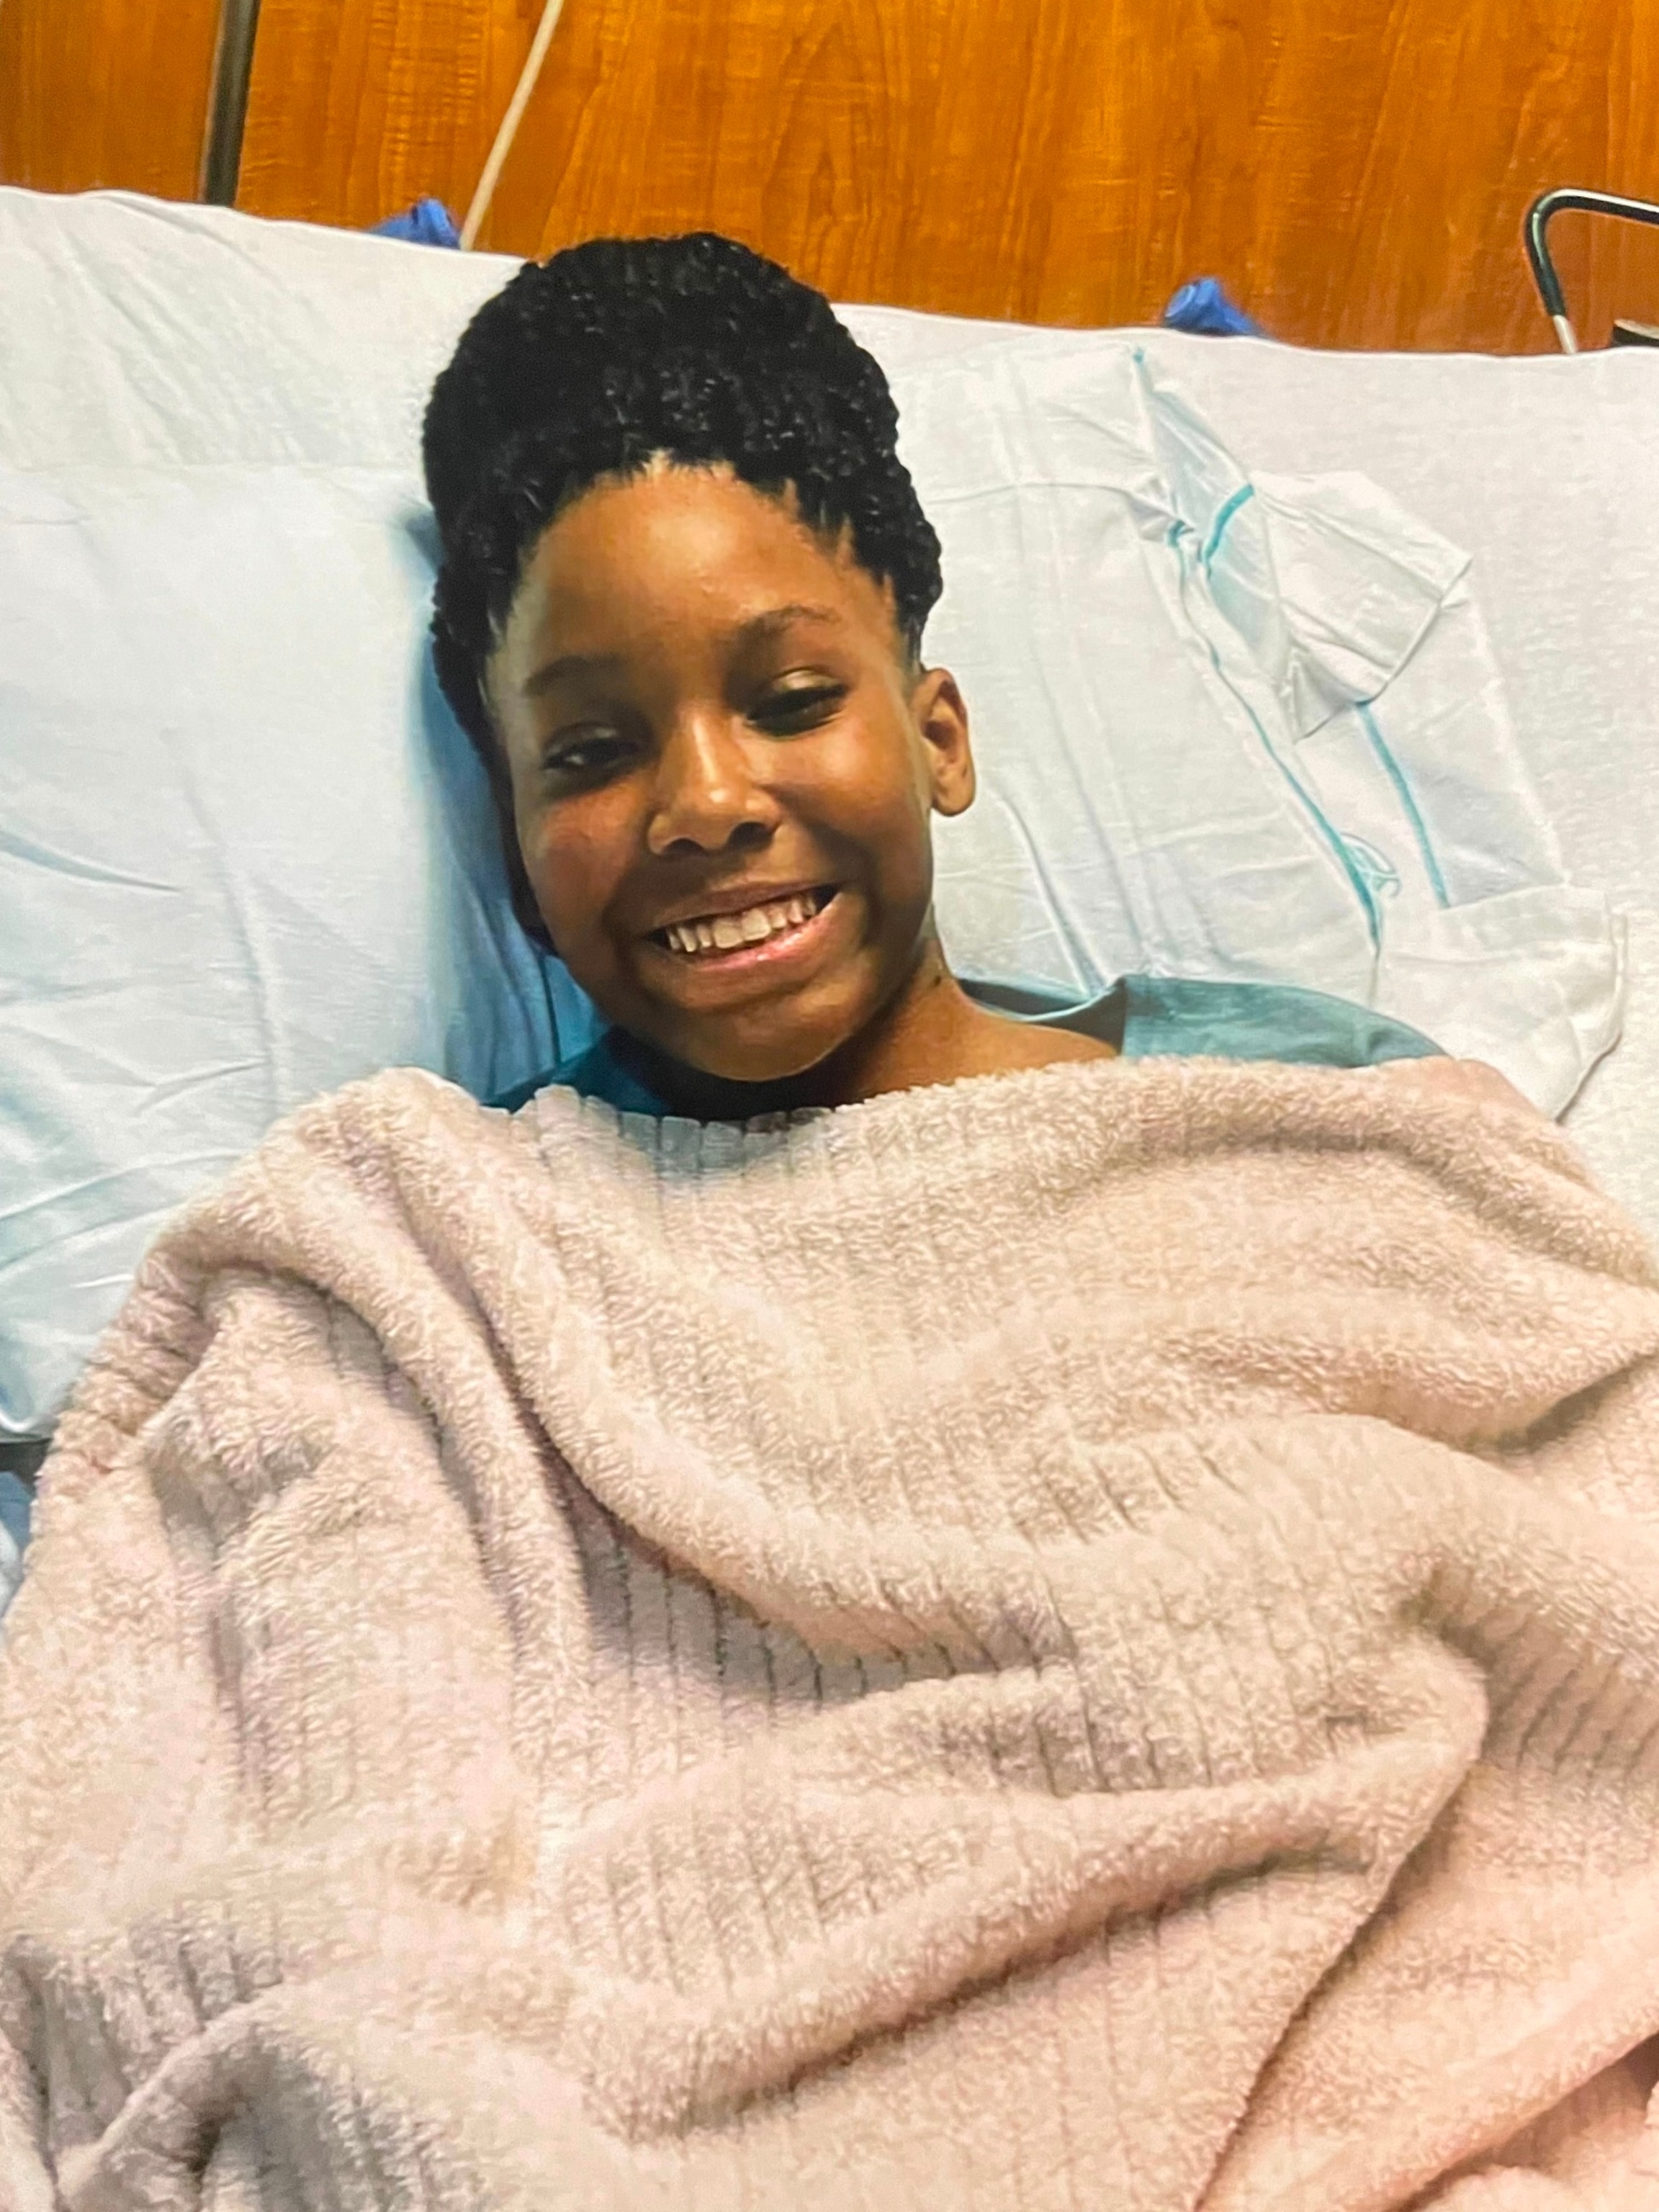 PHOTO: Aalayah Fulmore spent weeks in the hospital after she was shot in her home.